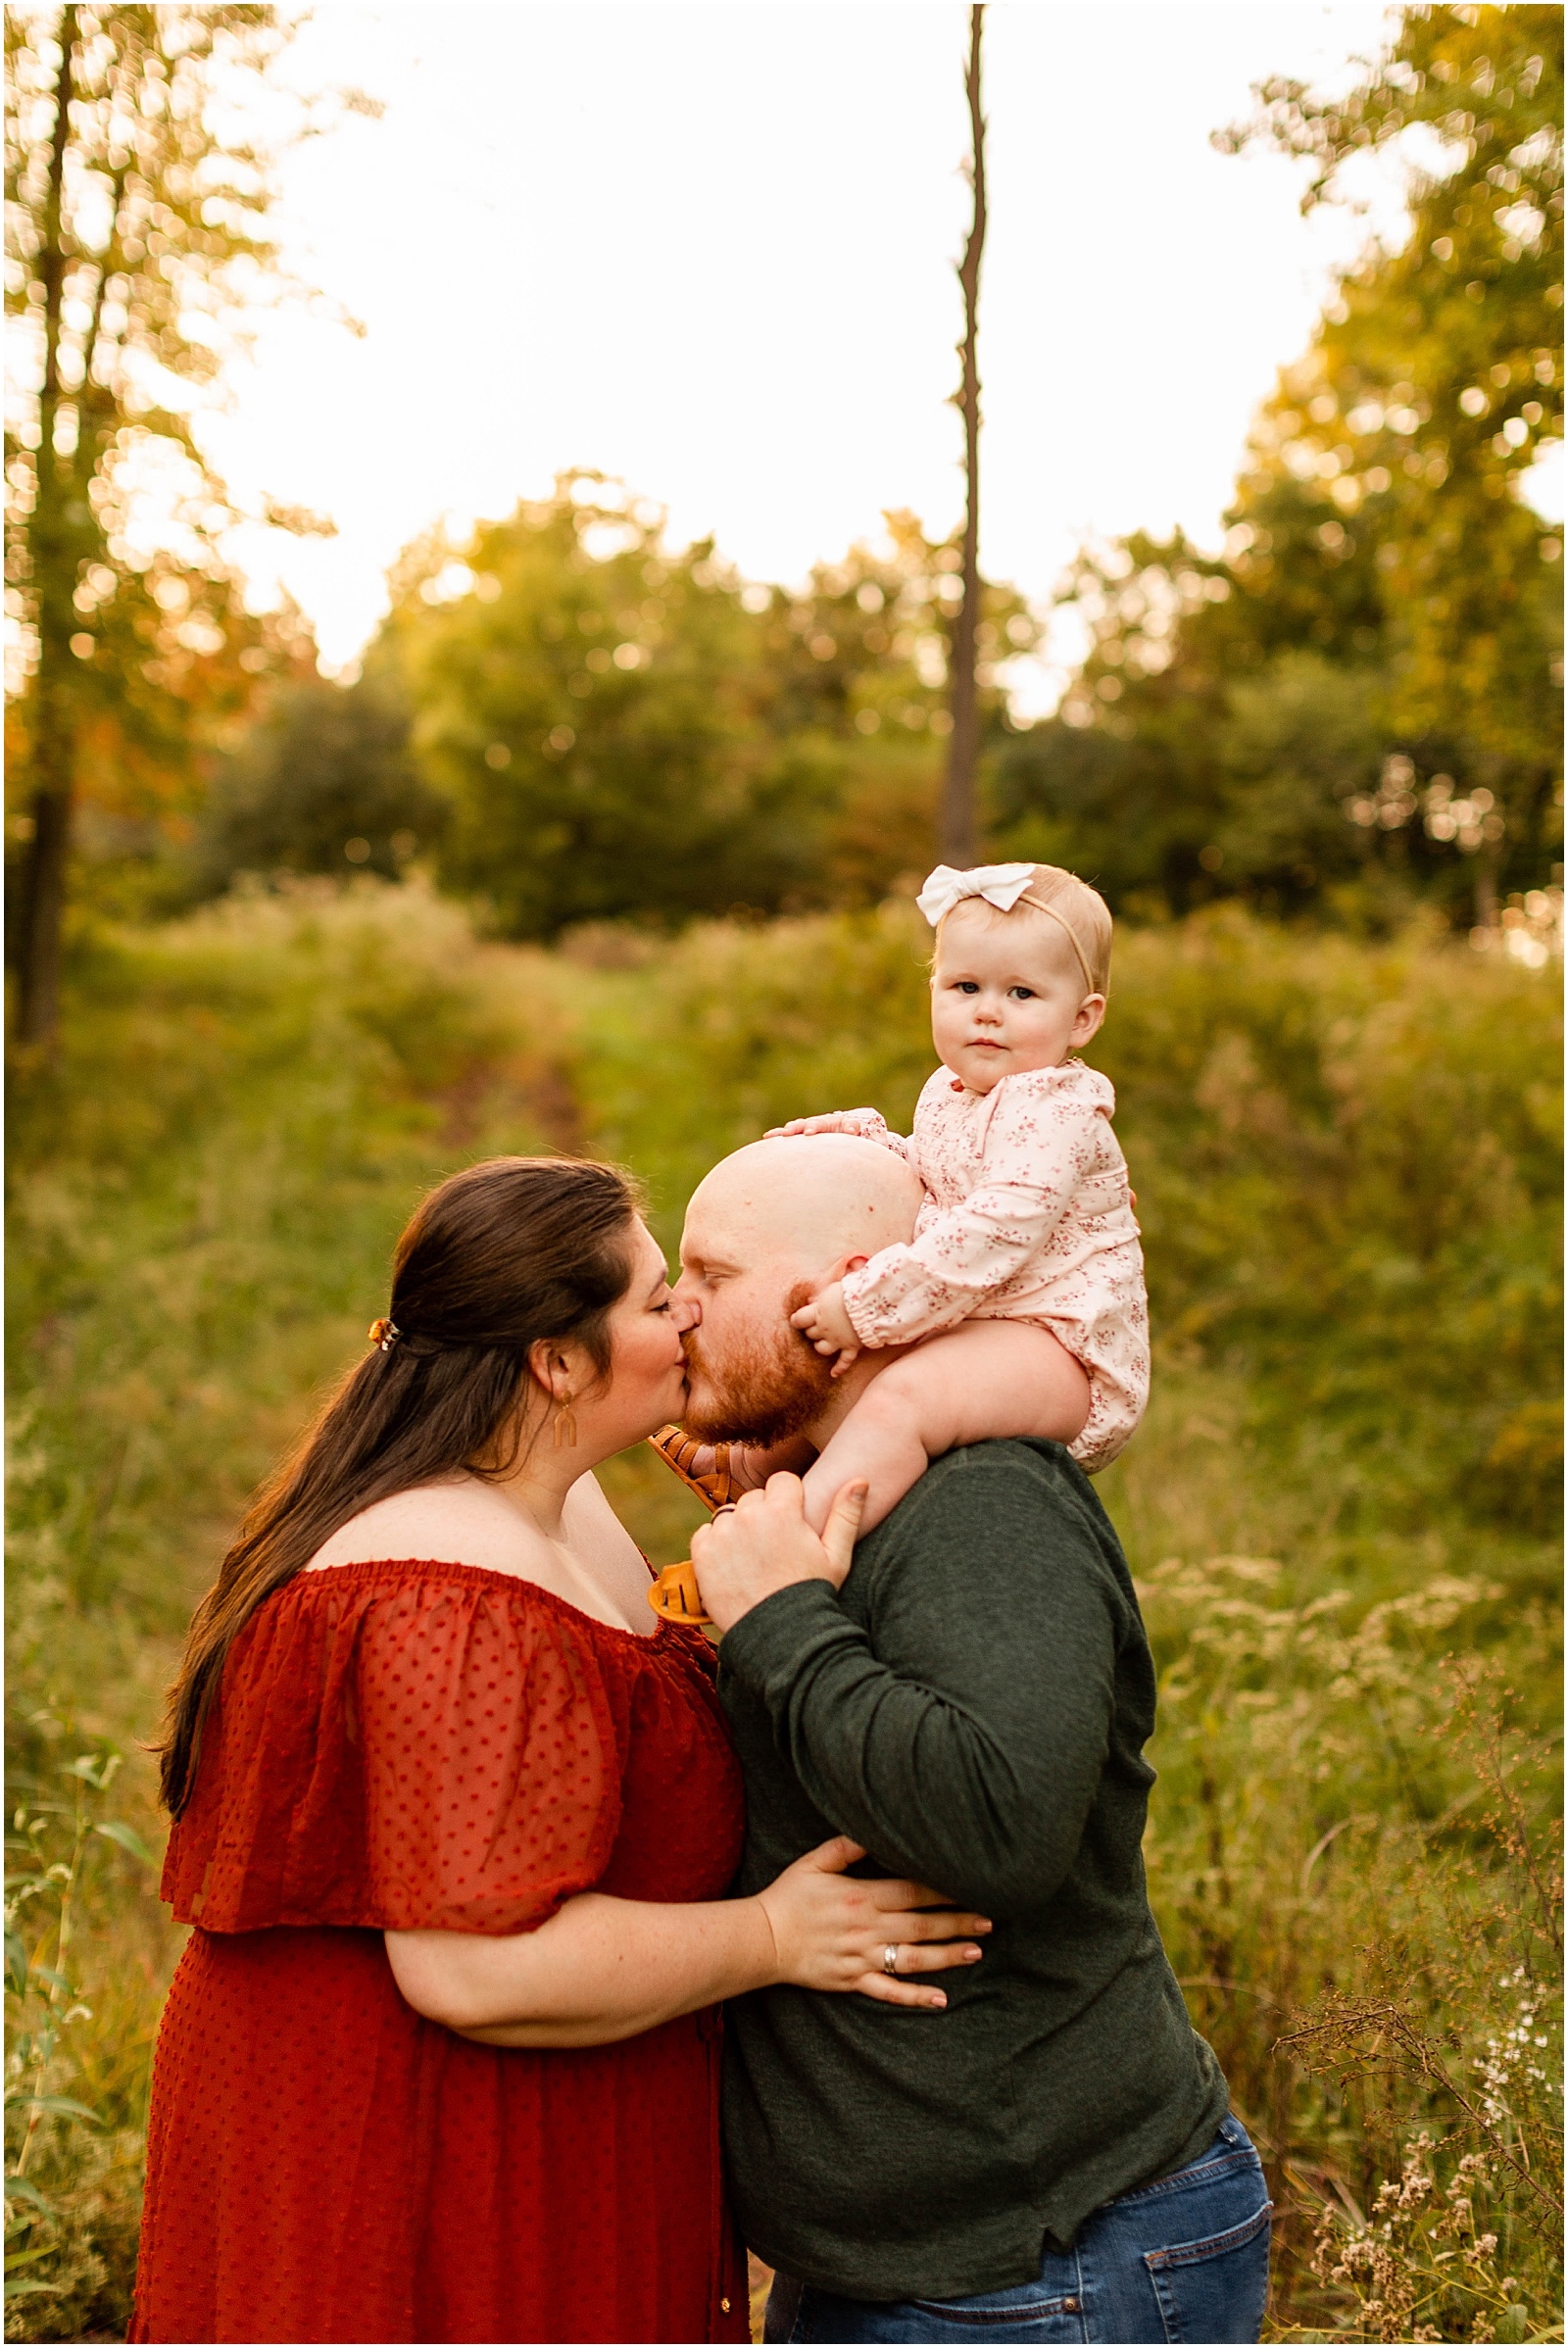 The Peck's Fall Family Session Bret and Brandie Photography | Evansville Indiana Wedding Photographers_0040.jpg